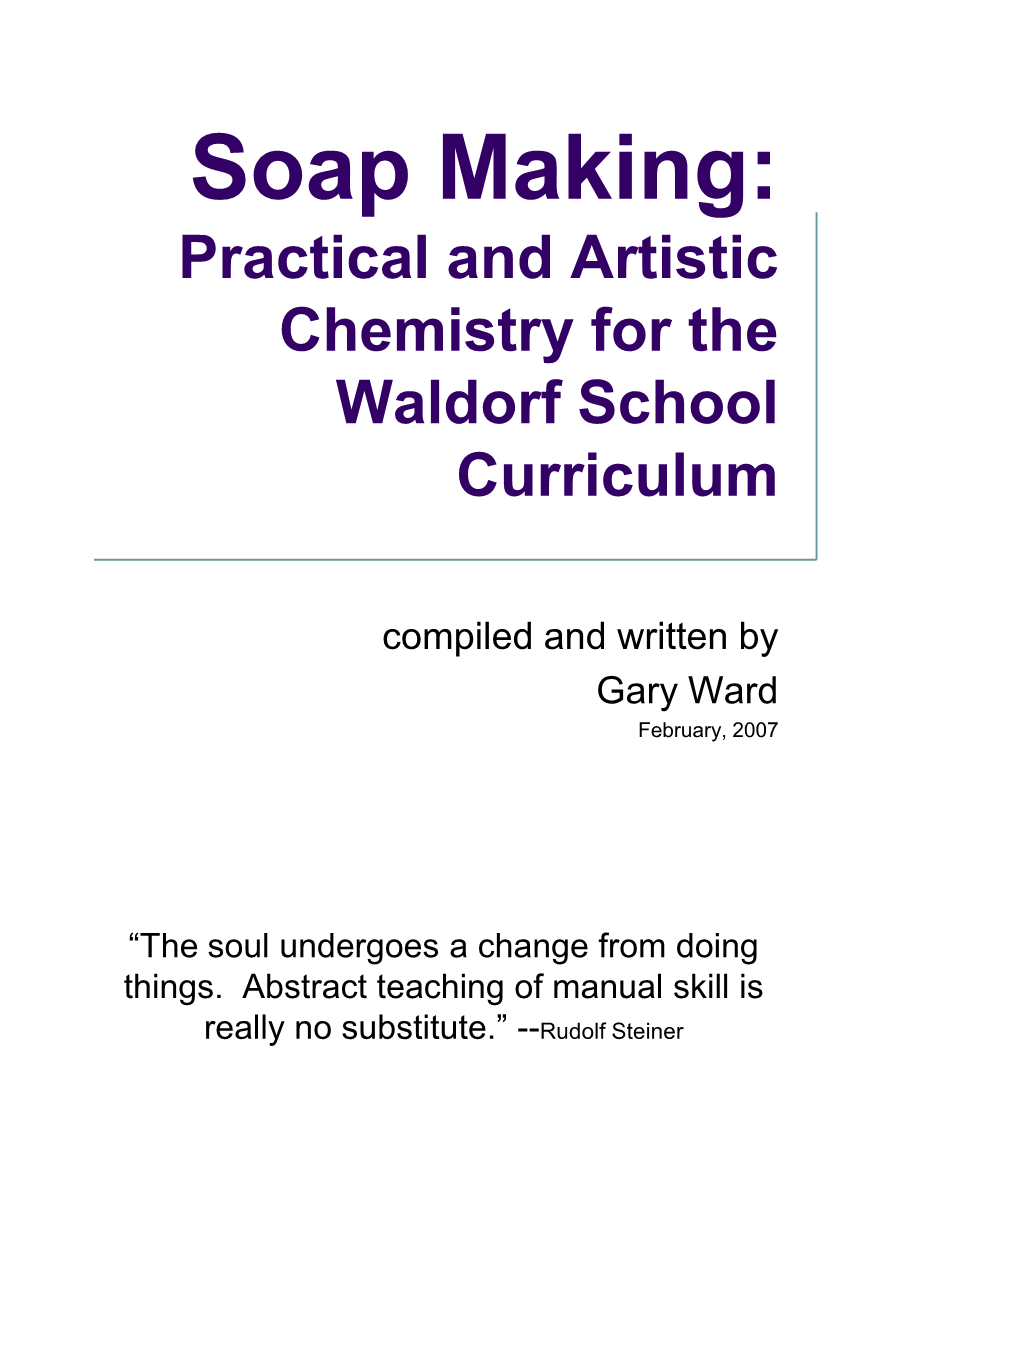 Soap Making: Practical and Artistic Chemistry for the Waldorf School Curriculum